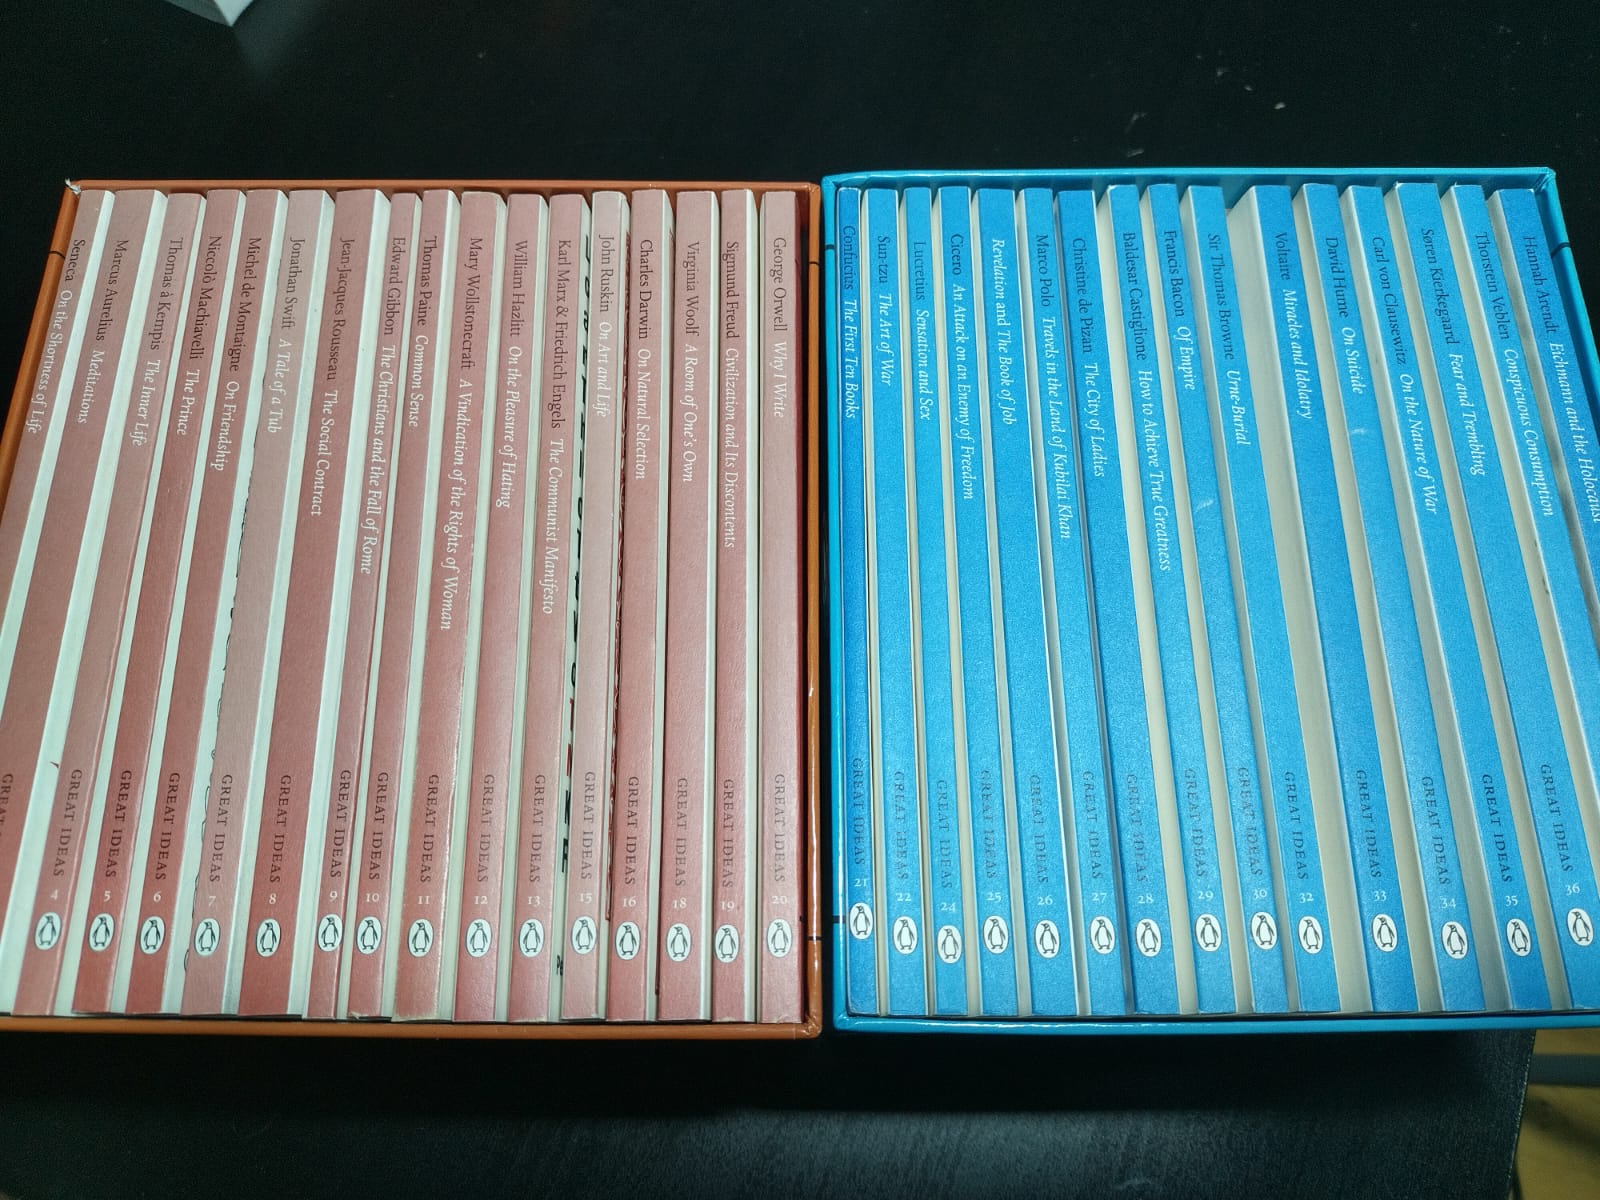 Spines of the 33 books